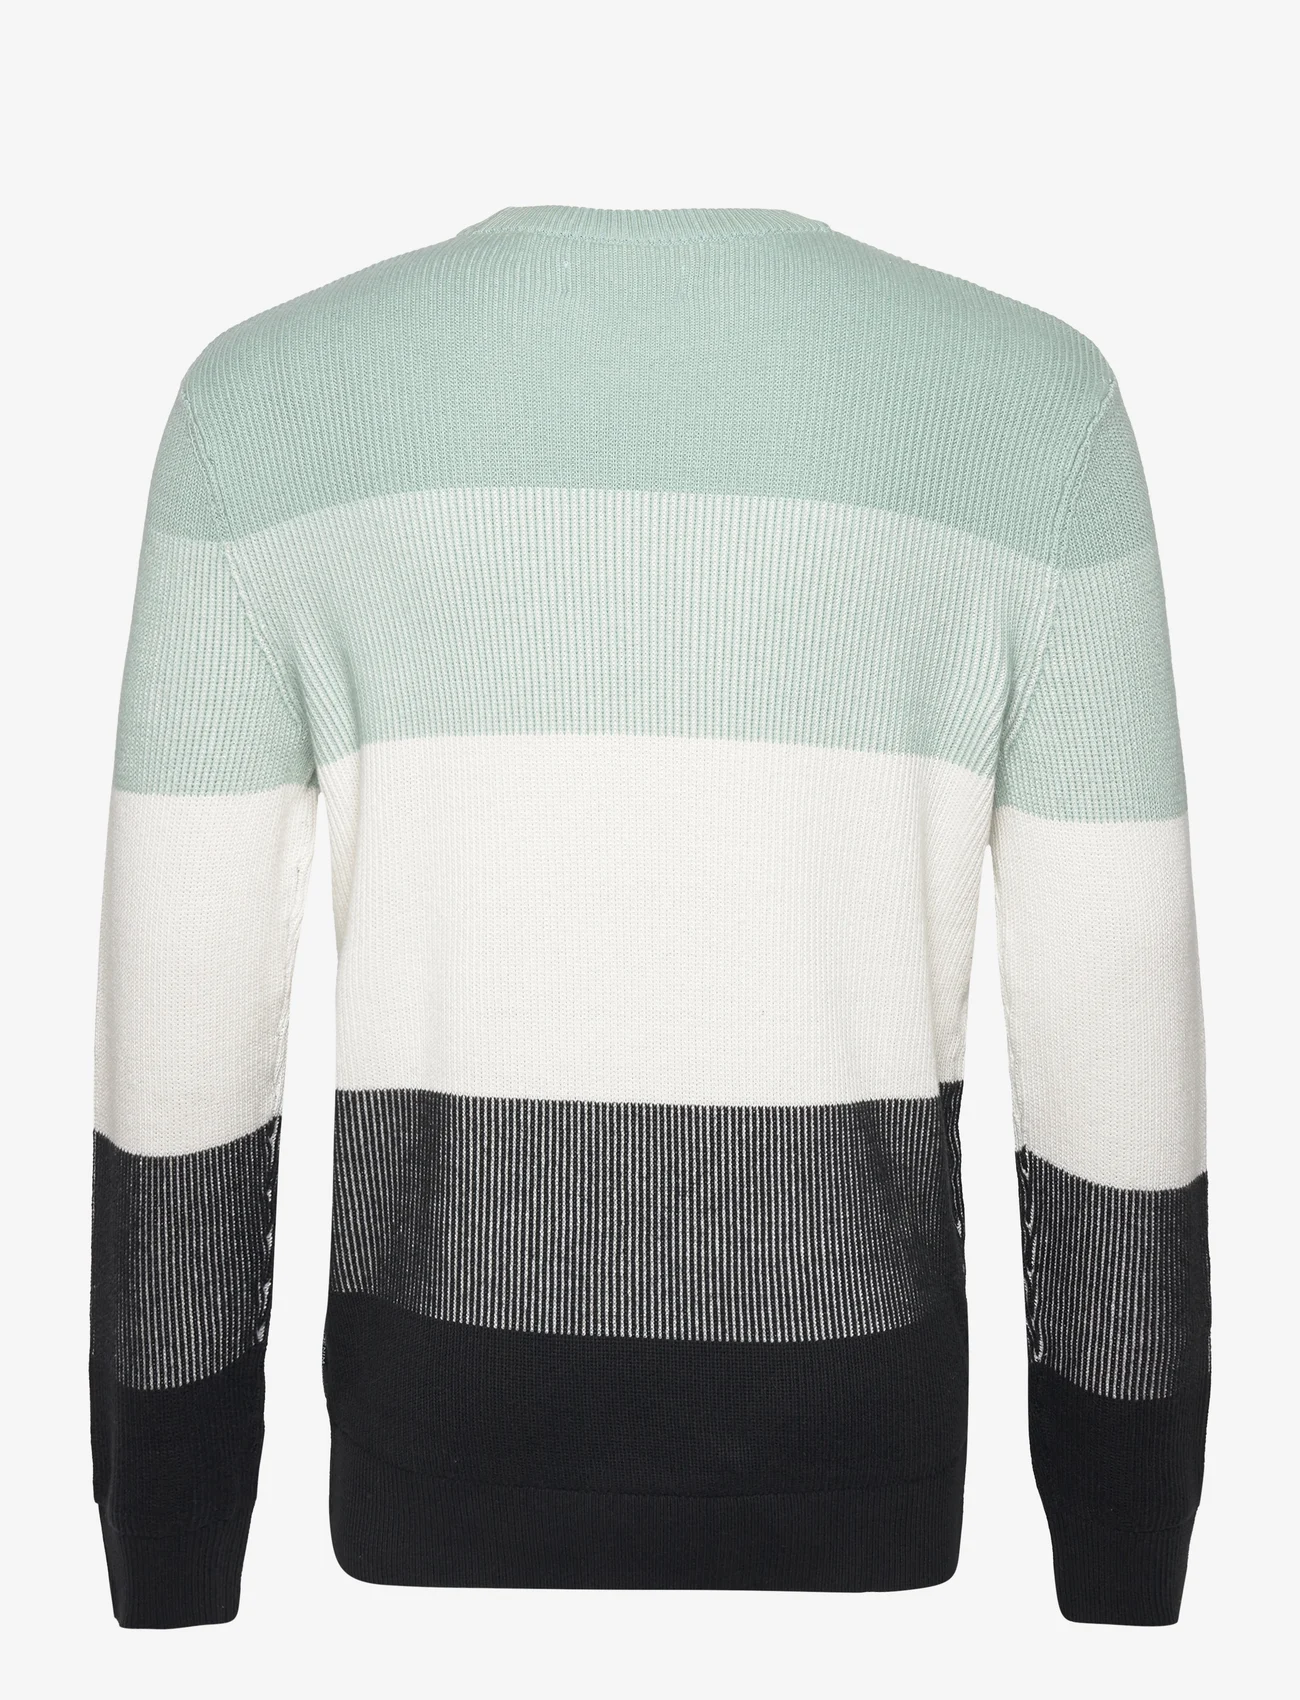 Tom Tailor - structured colorblock  knit - rund hals - mint white black colorblock - 1